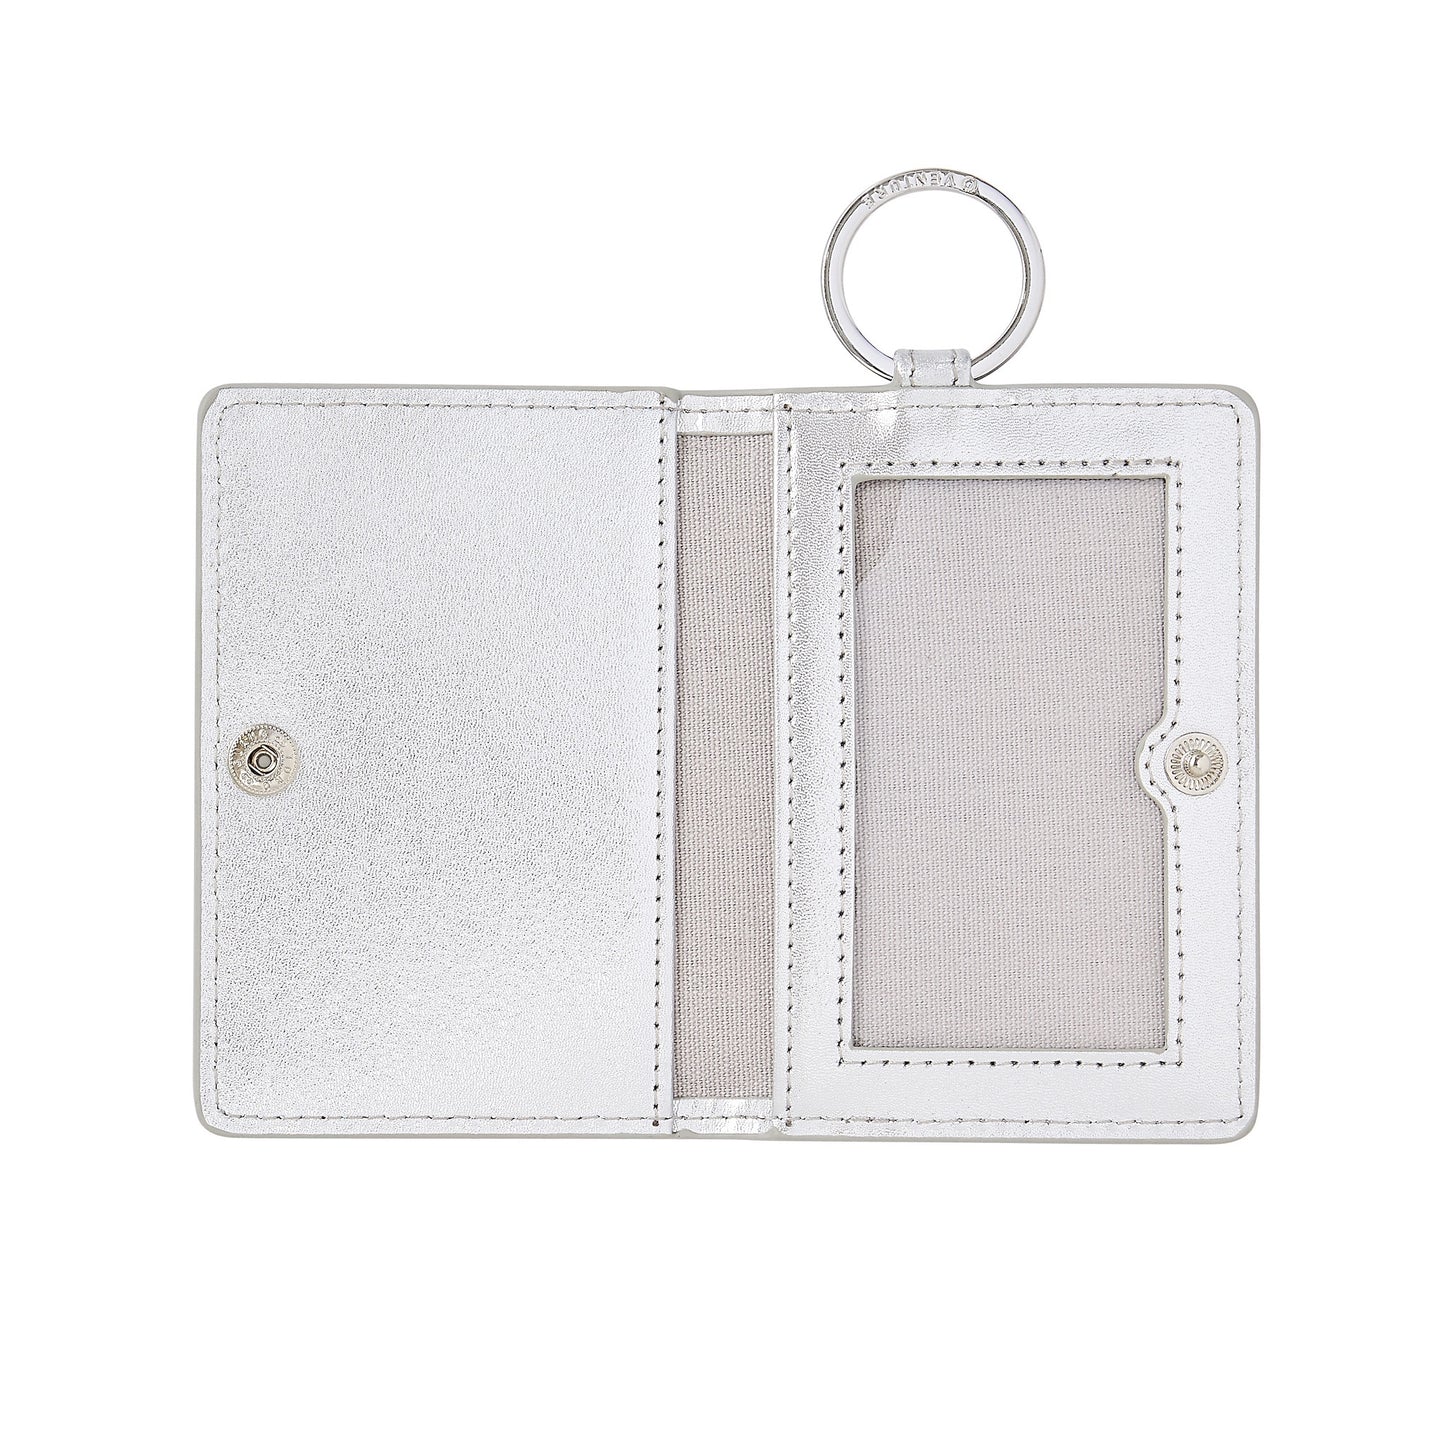 Silver leather bifold Keychain Wallet with compartments shown open.  